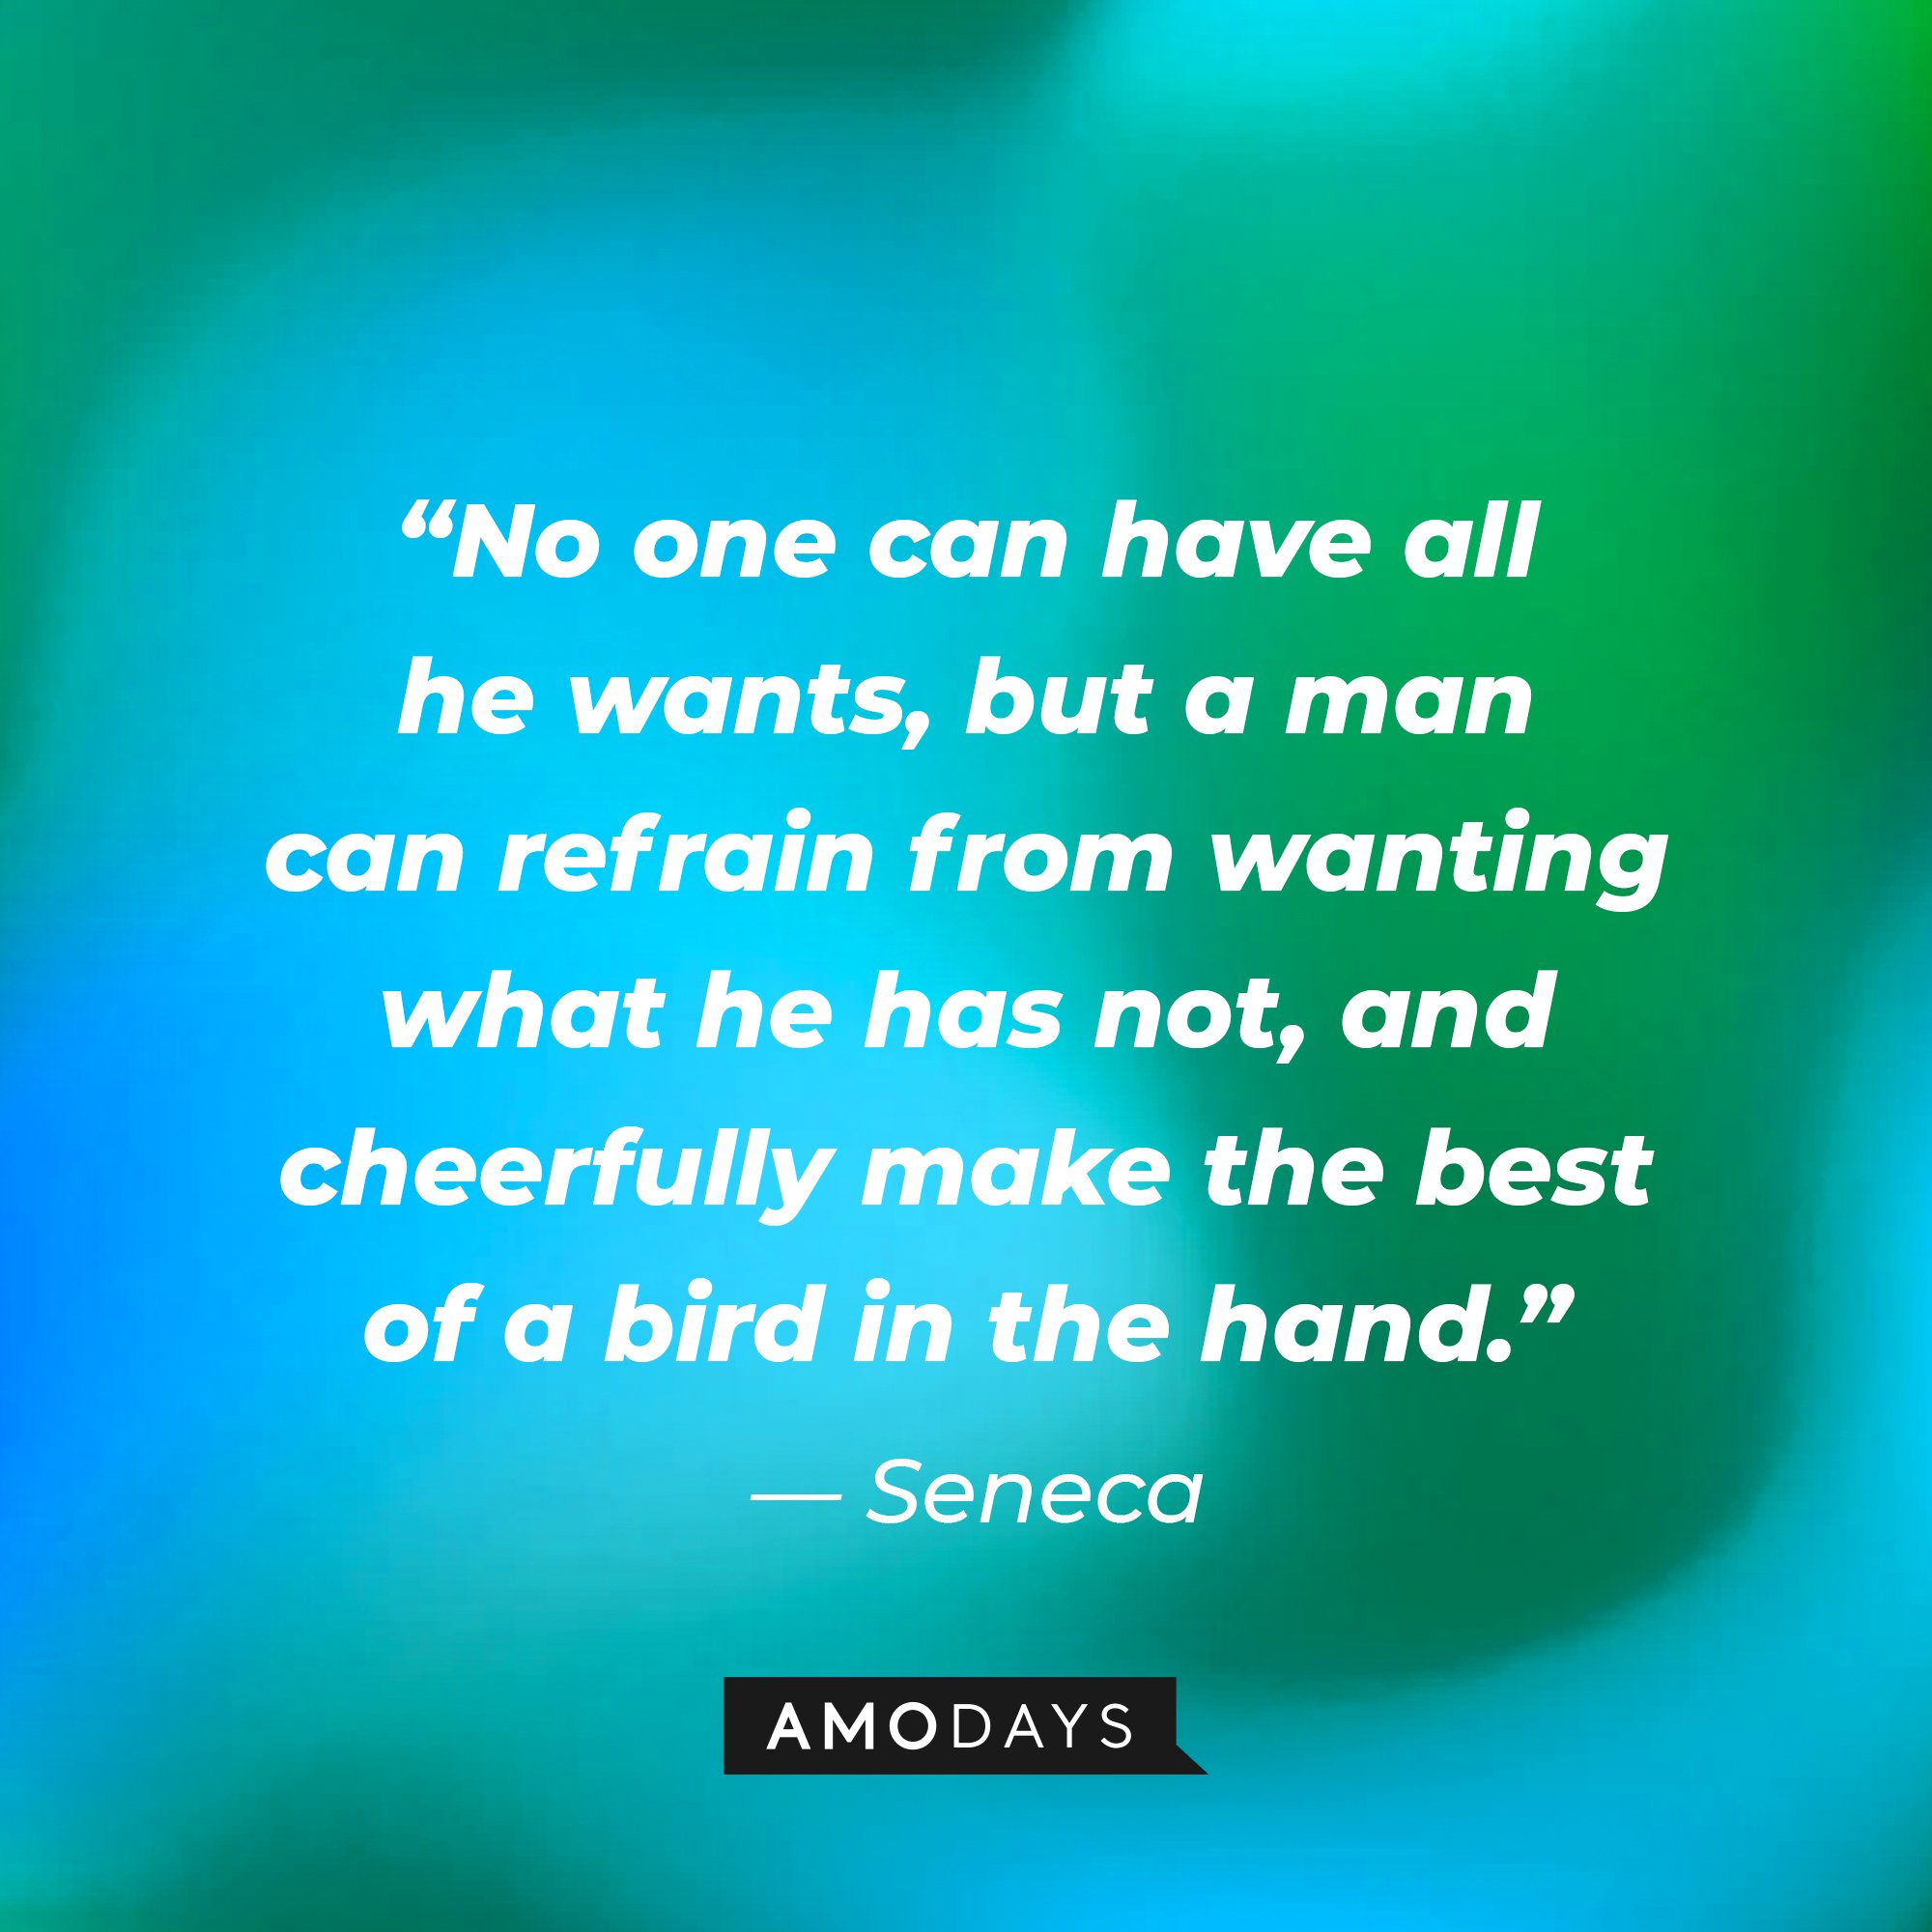  Seneca's quote: “No one can have all he wants, but a man can refrain from wanting what he has not, and cheerfully make the best of a bird in the hand.” | Image: AmoDays